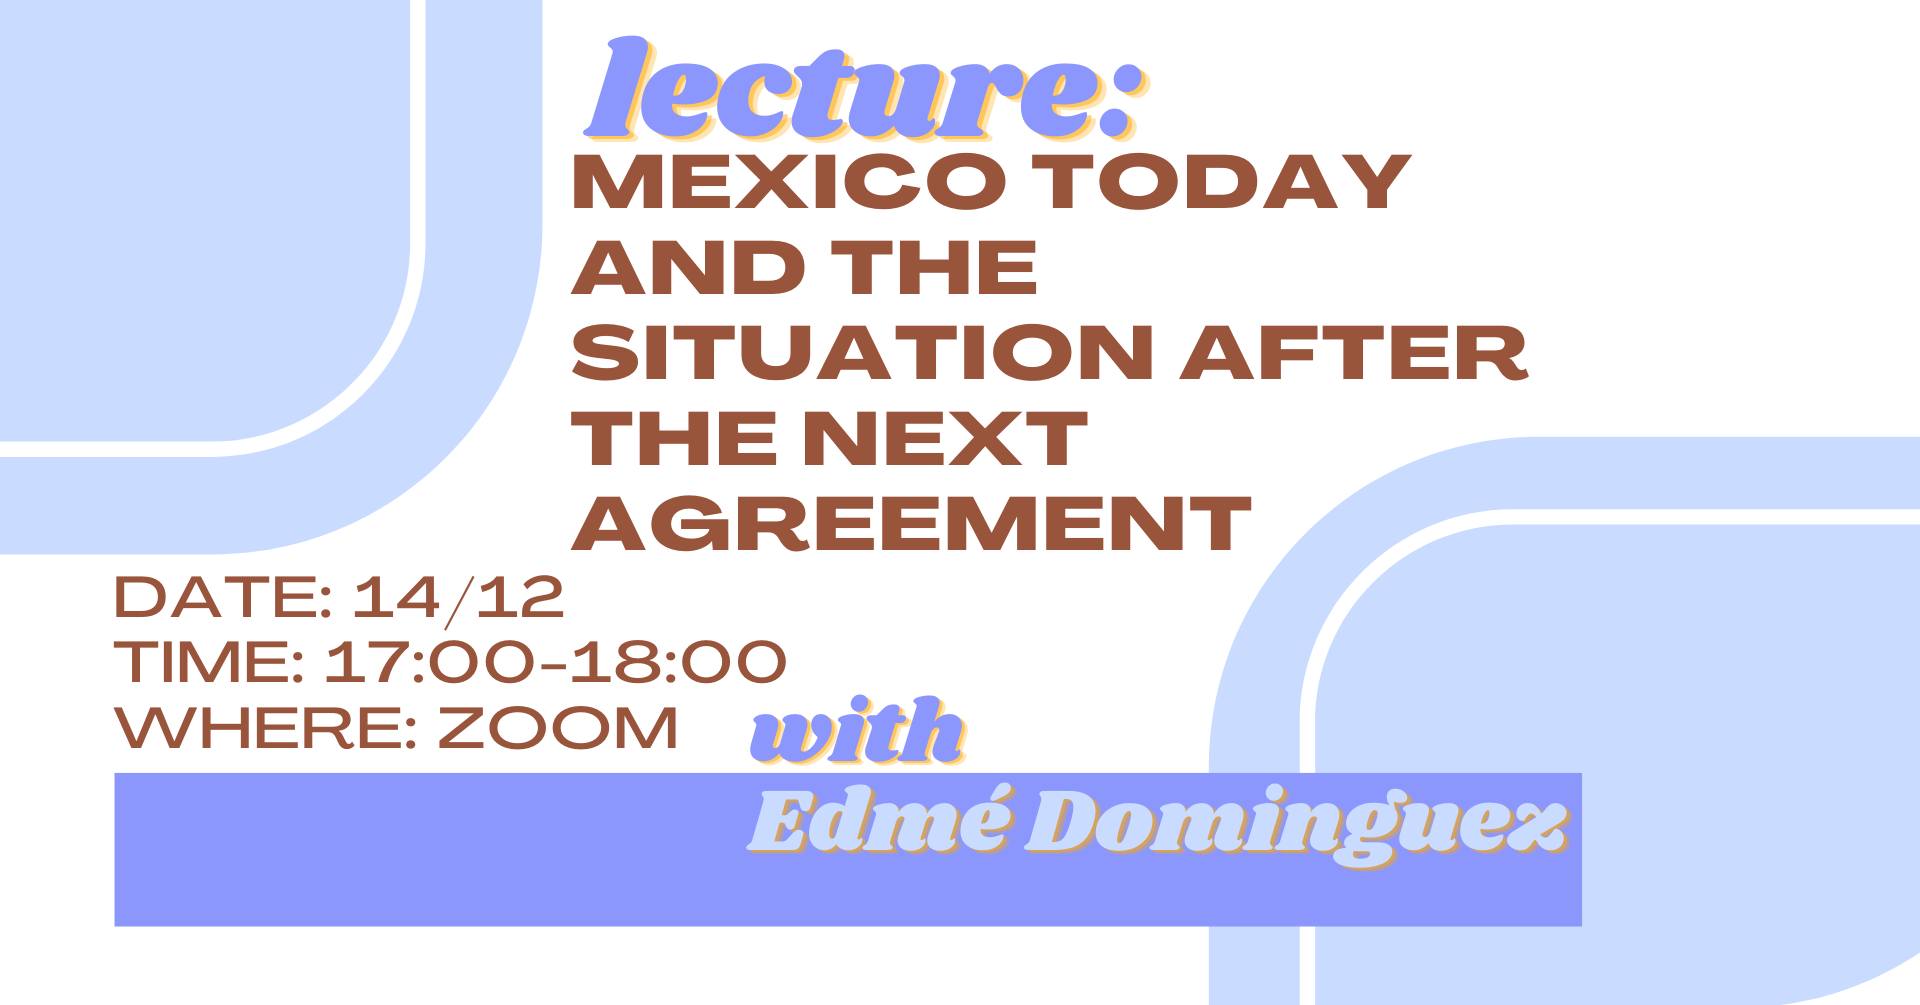 Lecture with Edmé Dominguez on Mexico